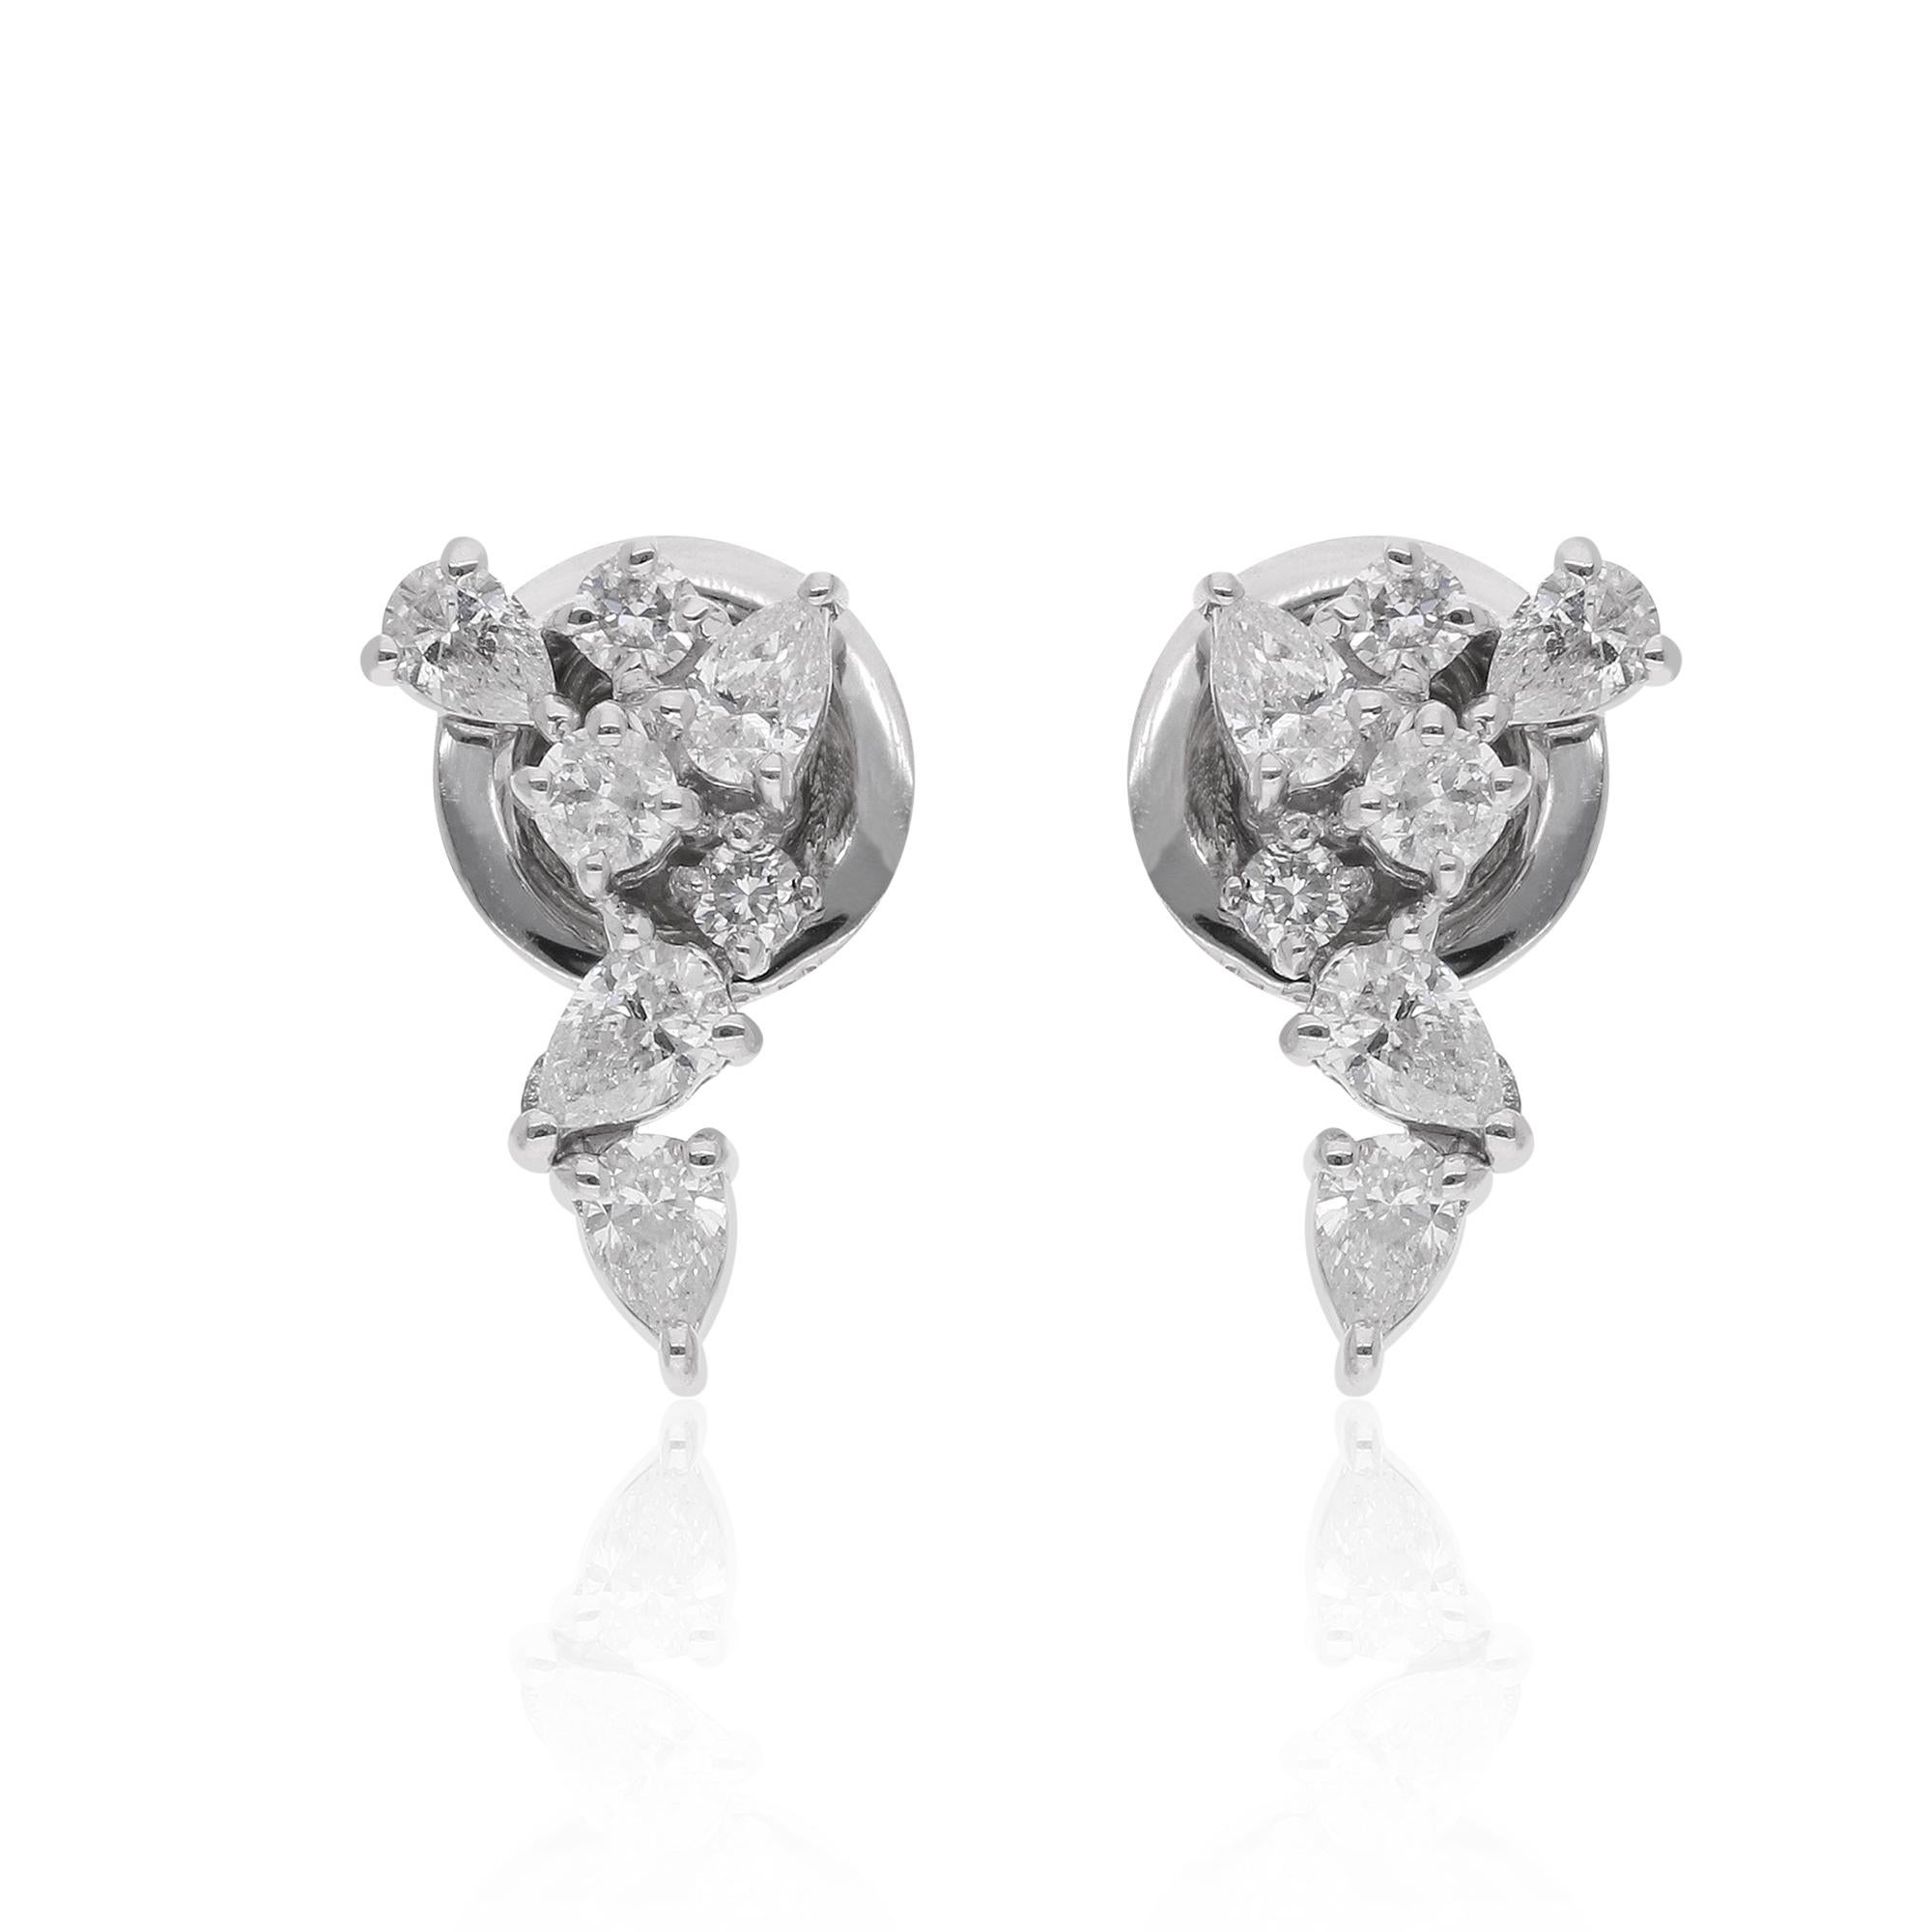 The pear-shaped diamonds, with their graceful silhouette and captivating sparkle, take center stage in these earrings, while the surrounding round diamonds add a touch of classic sophistication. Set in radiant white gold, the diamonds shimmer and